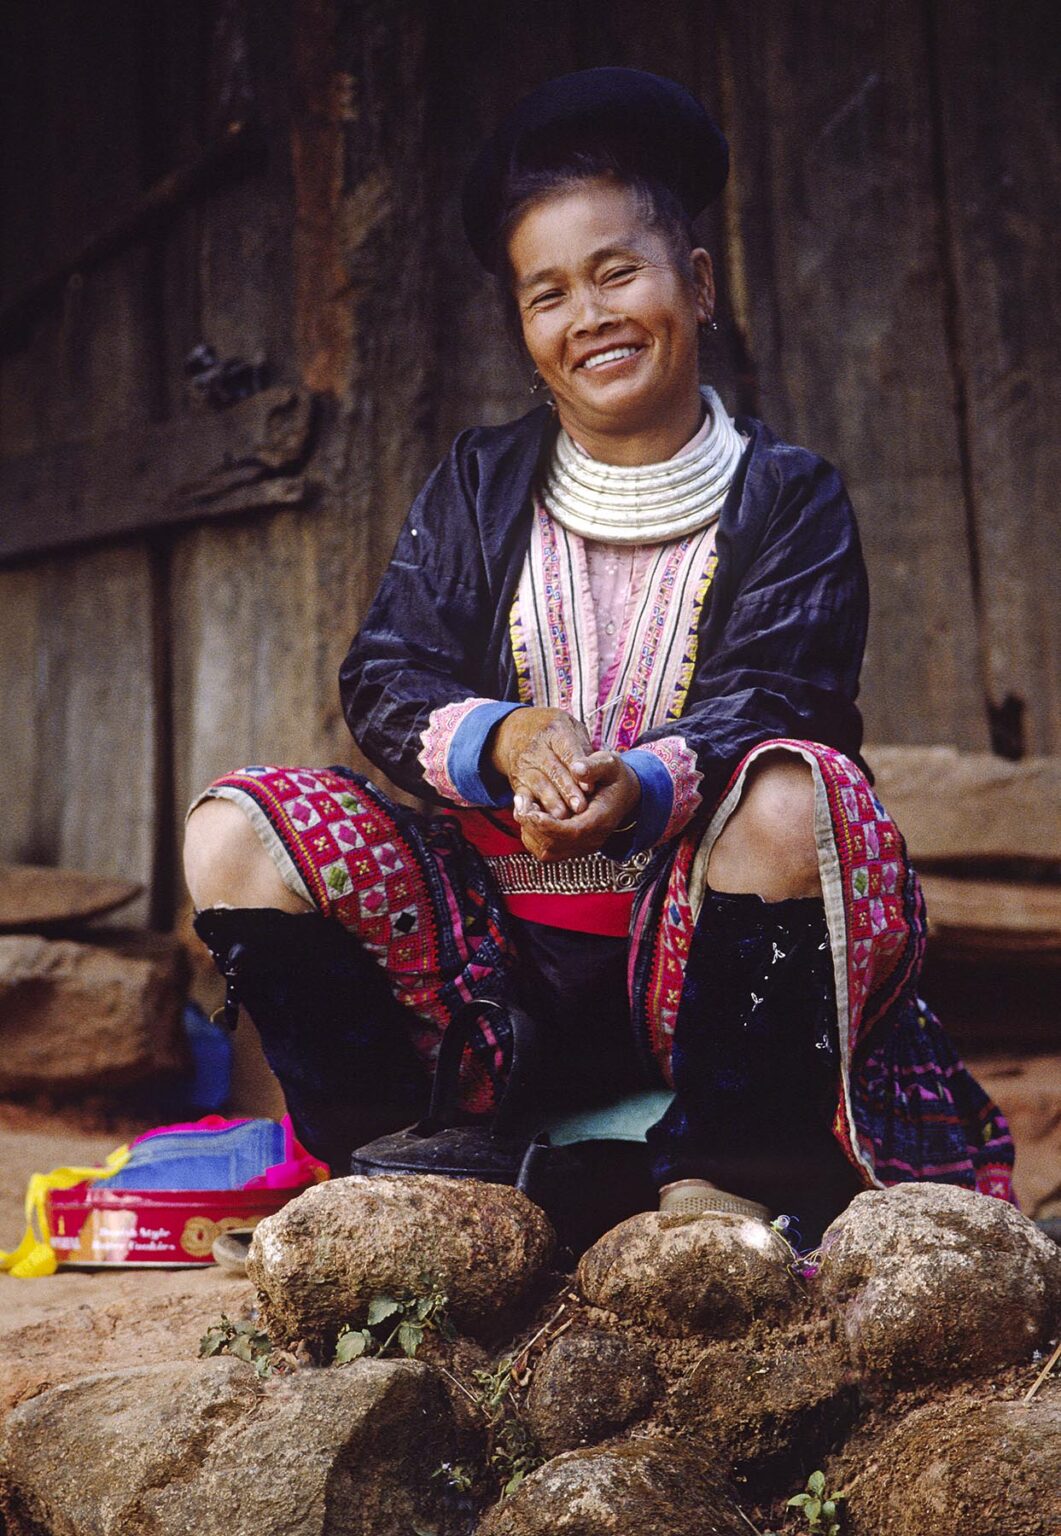 Smiling MEO tribal woman of the NORTHERN HILL TRIBES - CHIANG MAI, THAILAND